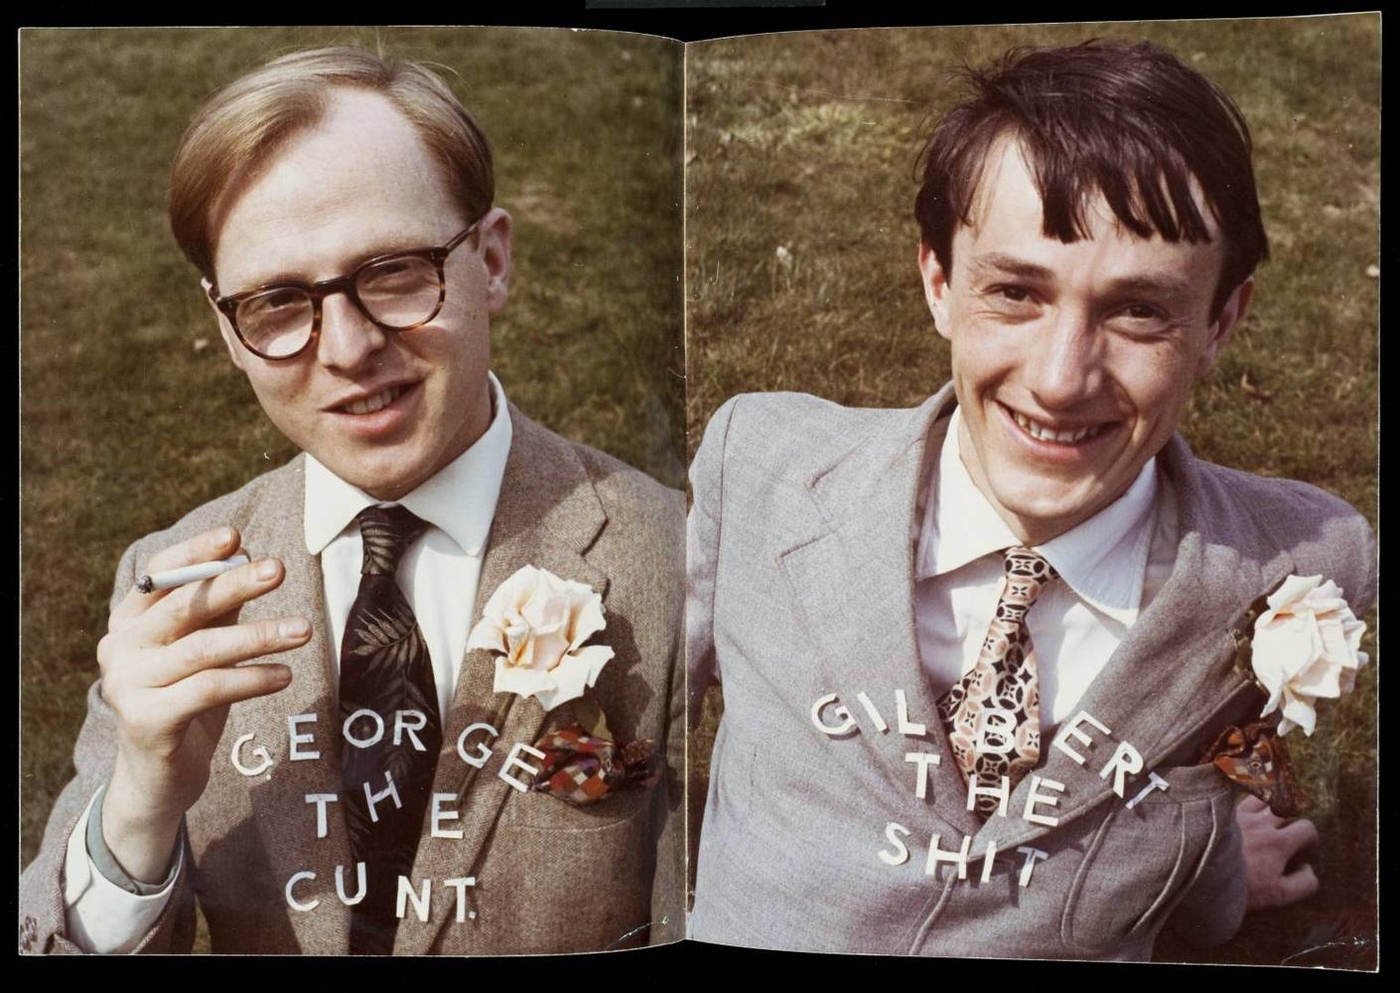 Gilbert & George, <em>George the Cunt and Gilbert the Shit</em>, 1969. (13/13)